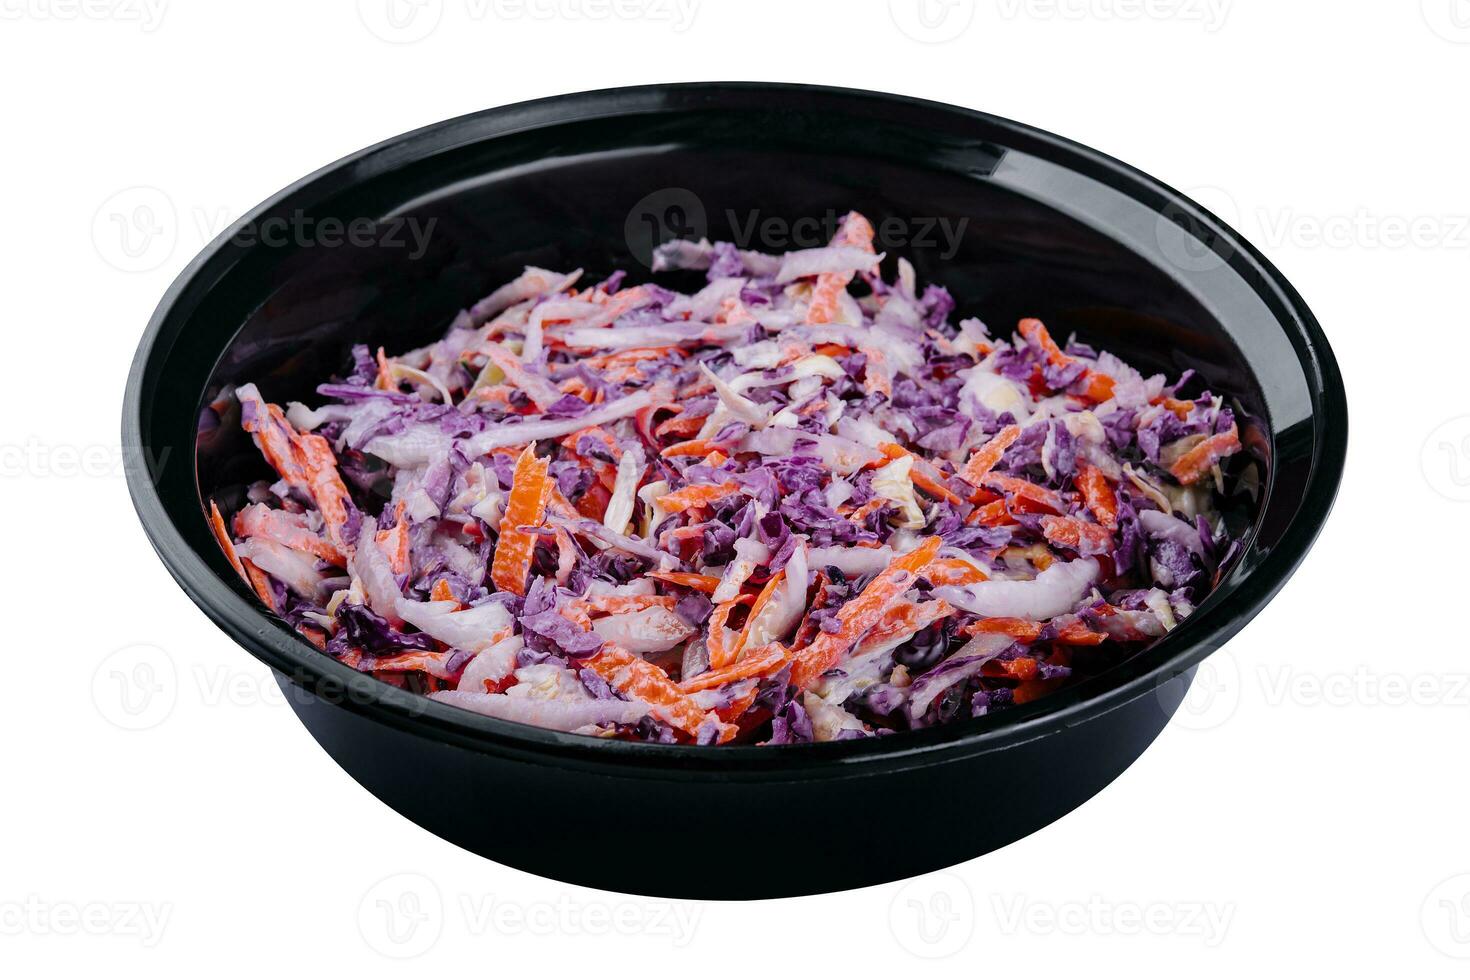 Red cabbage salad. coleslaw in a bowl. photo